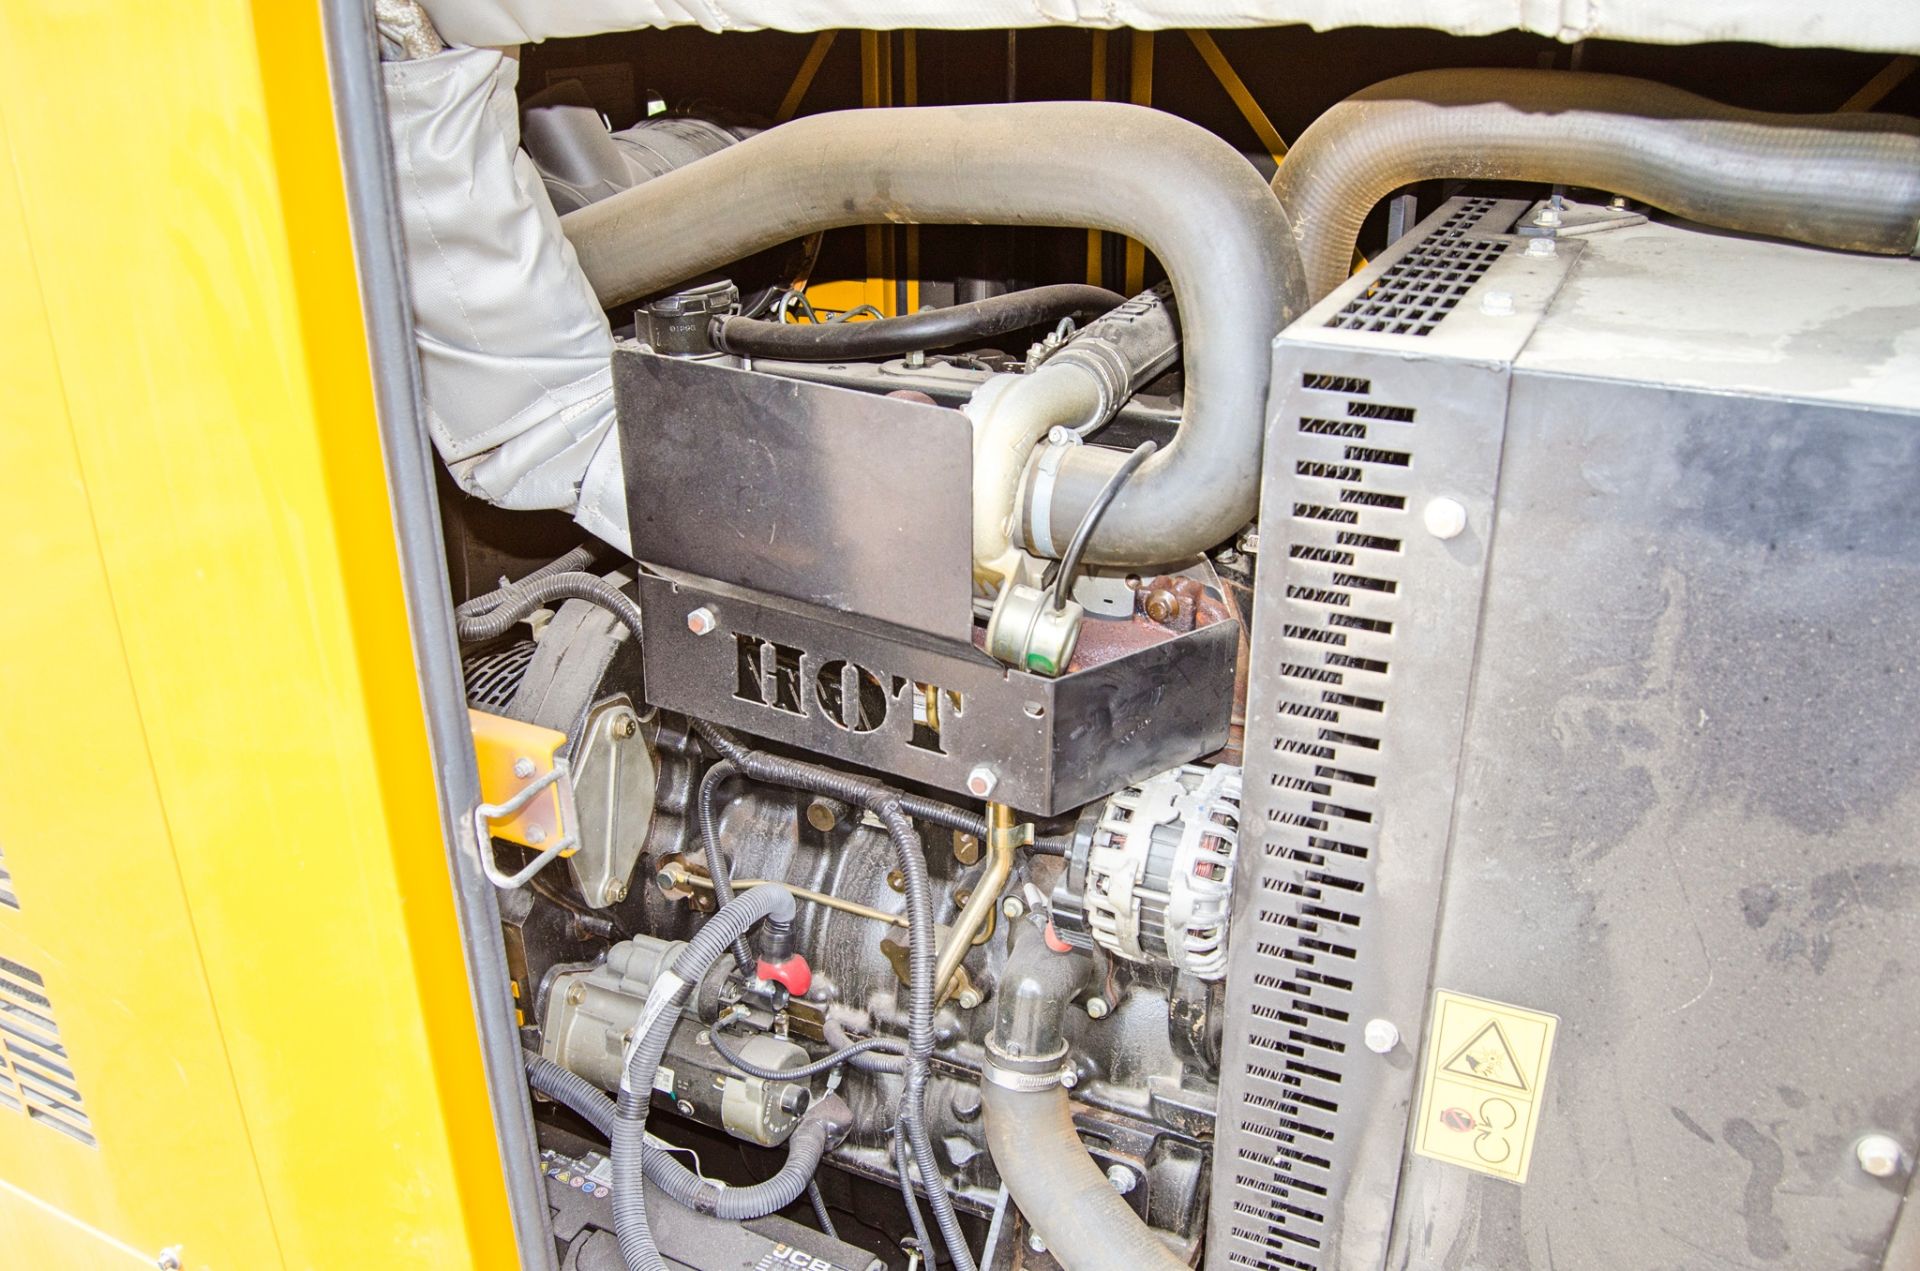 JCB 66QS 60 kva diesel driven generator Year: 2017 S/N: 2292241 Recorded hours: 12285 YG777 - Image 7 of 7